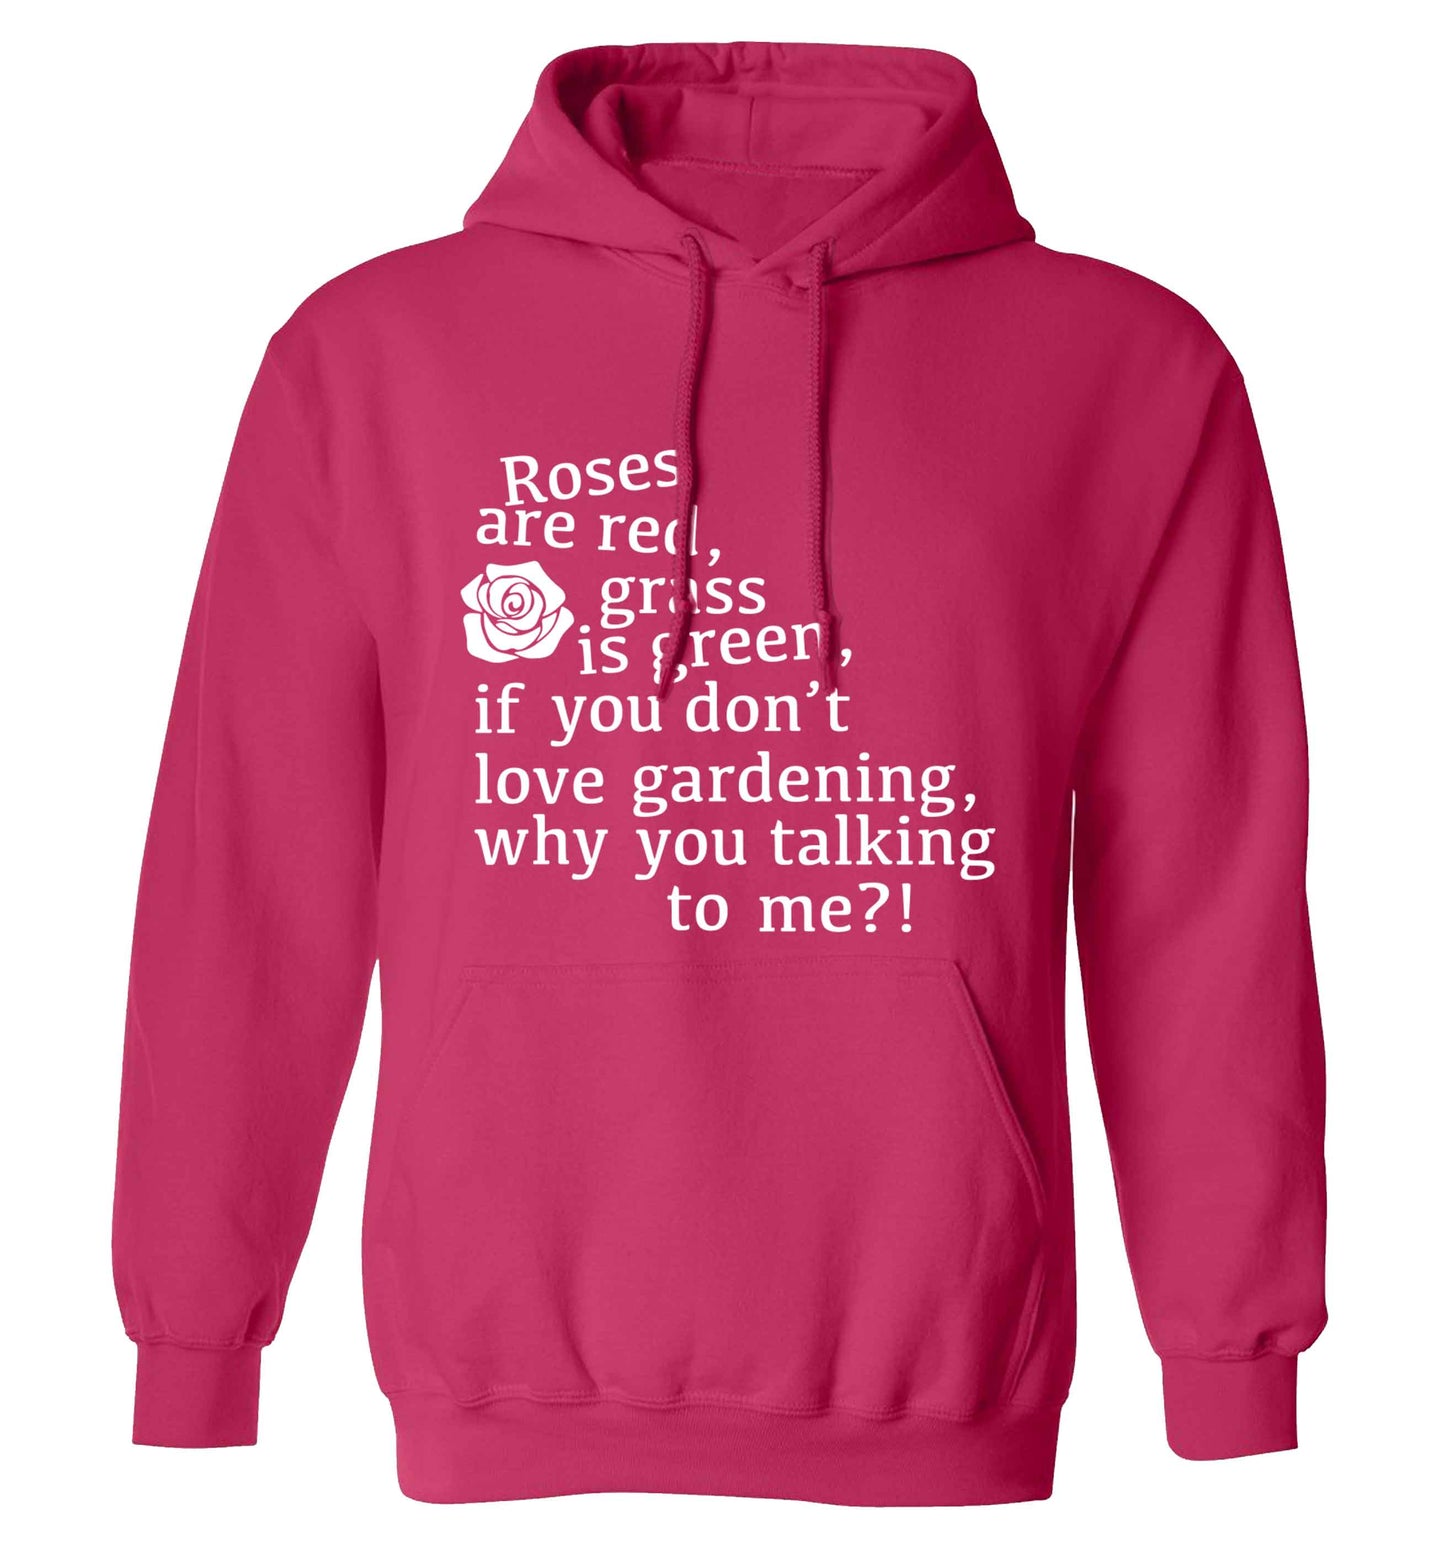 Roses are red, grass is green, if you don't love gardening, why you talking to me adults unisex pink hoodie 2XL